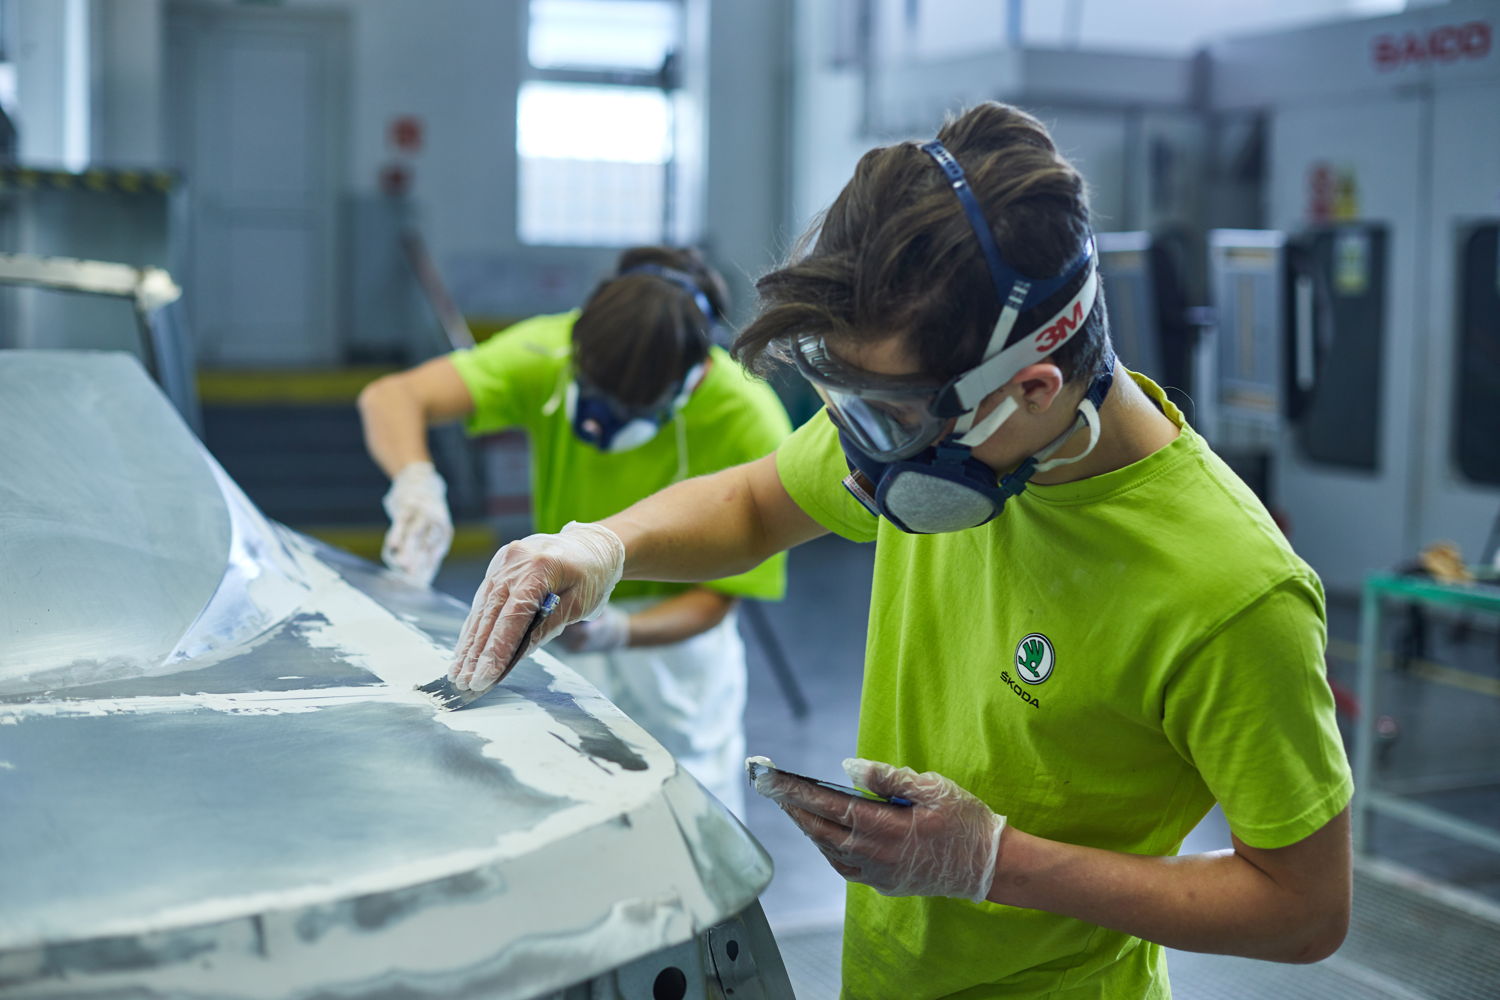 After a break of around two months, the apprentices and their teachers can now partially resume work on the seventh Student Car. The apprentices of the ŠKODA vocational school began transforming the body of the ŠKODA SCALA into their Spider version at the beginning of the year (photo).